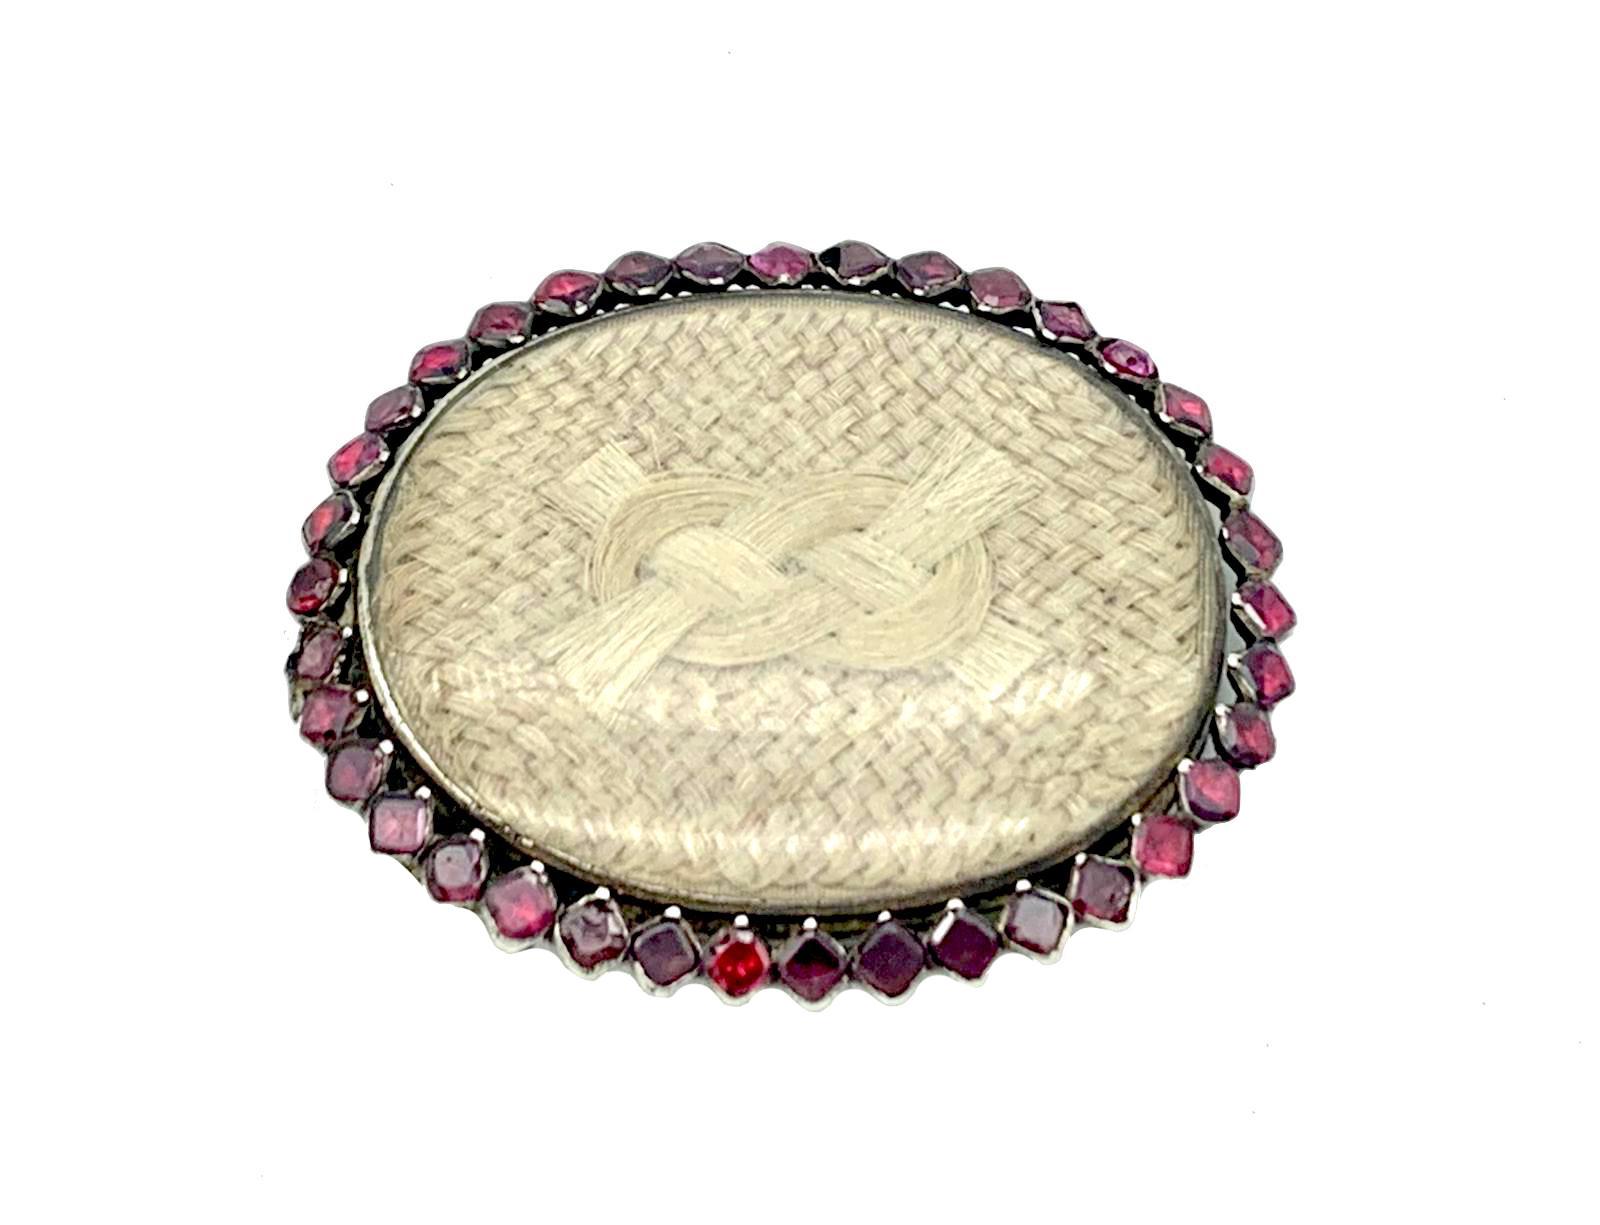 This Georgian Clasp was handcrafted in the last quarter of the 18th century. These kind of clasps were used for bracelets and for necklaces. The clasp is made out of silver and set with flat cut square garnets. Two of the garnets are chipped. Under